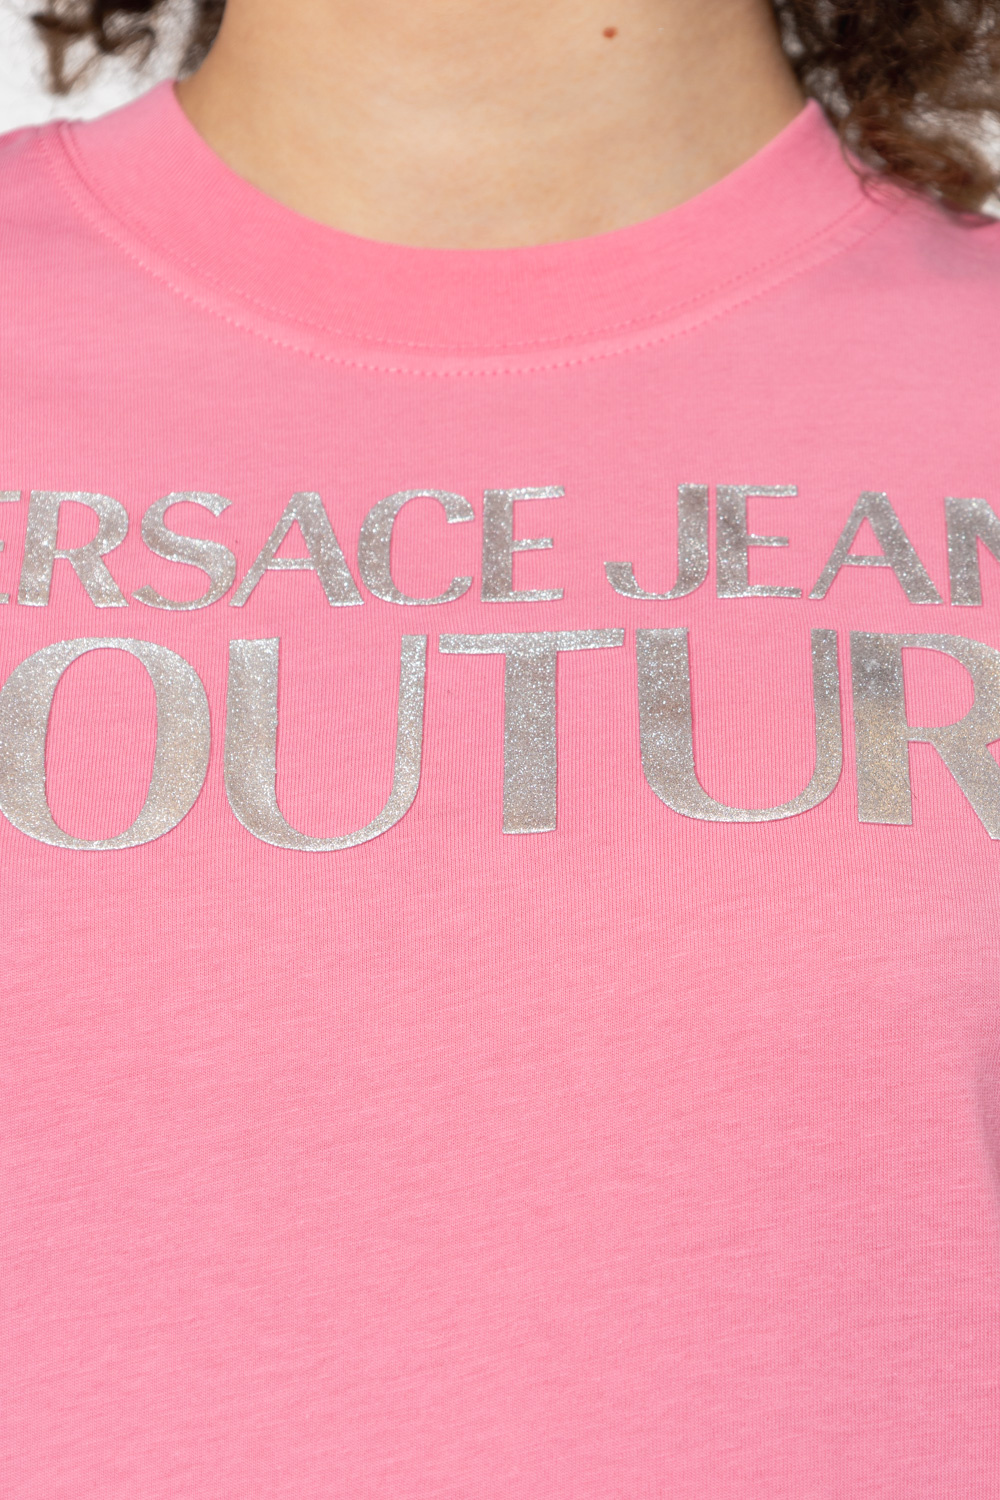 Versace Jeans Couture square emblem backprint t-shirt in black